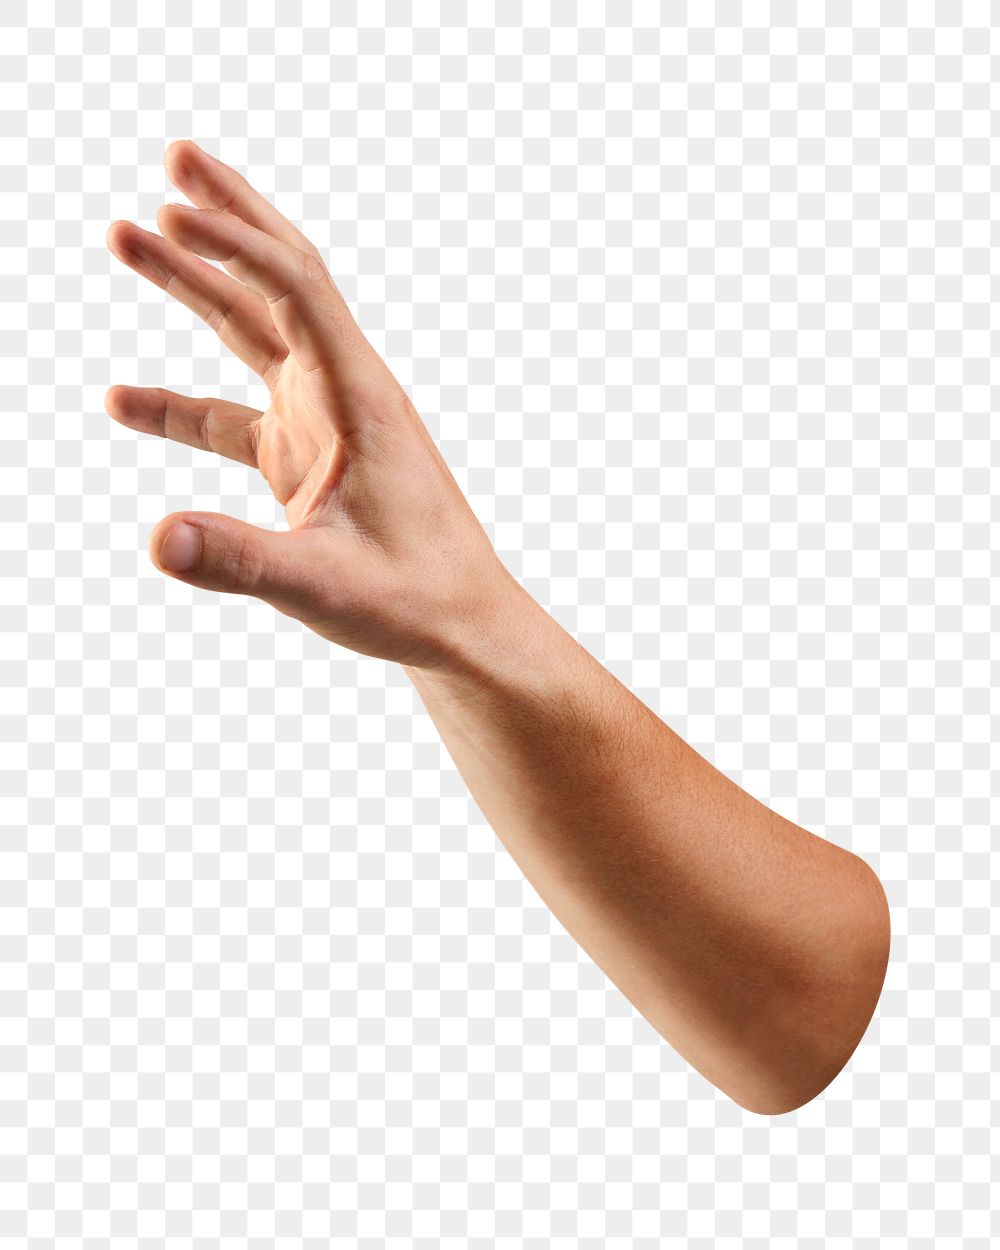 Hand reaching png sticker, transparent background